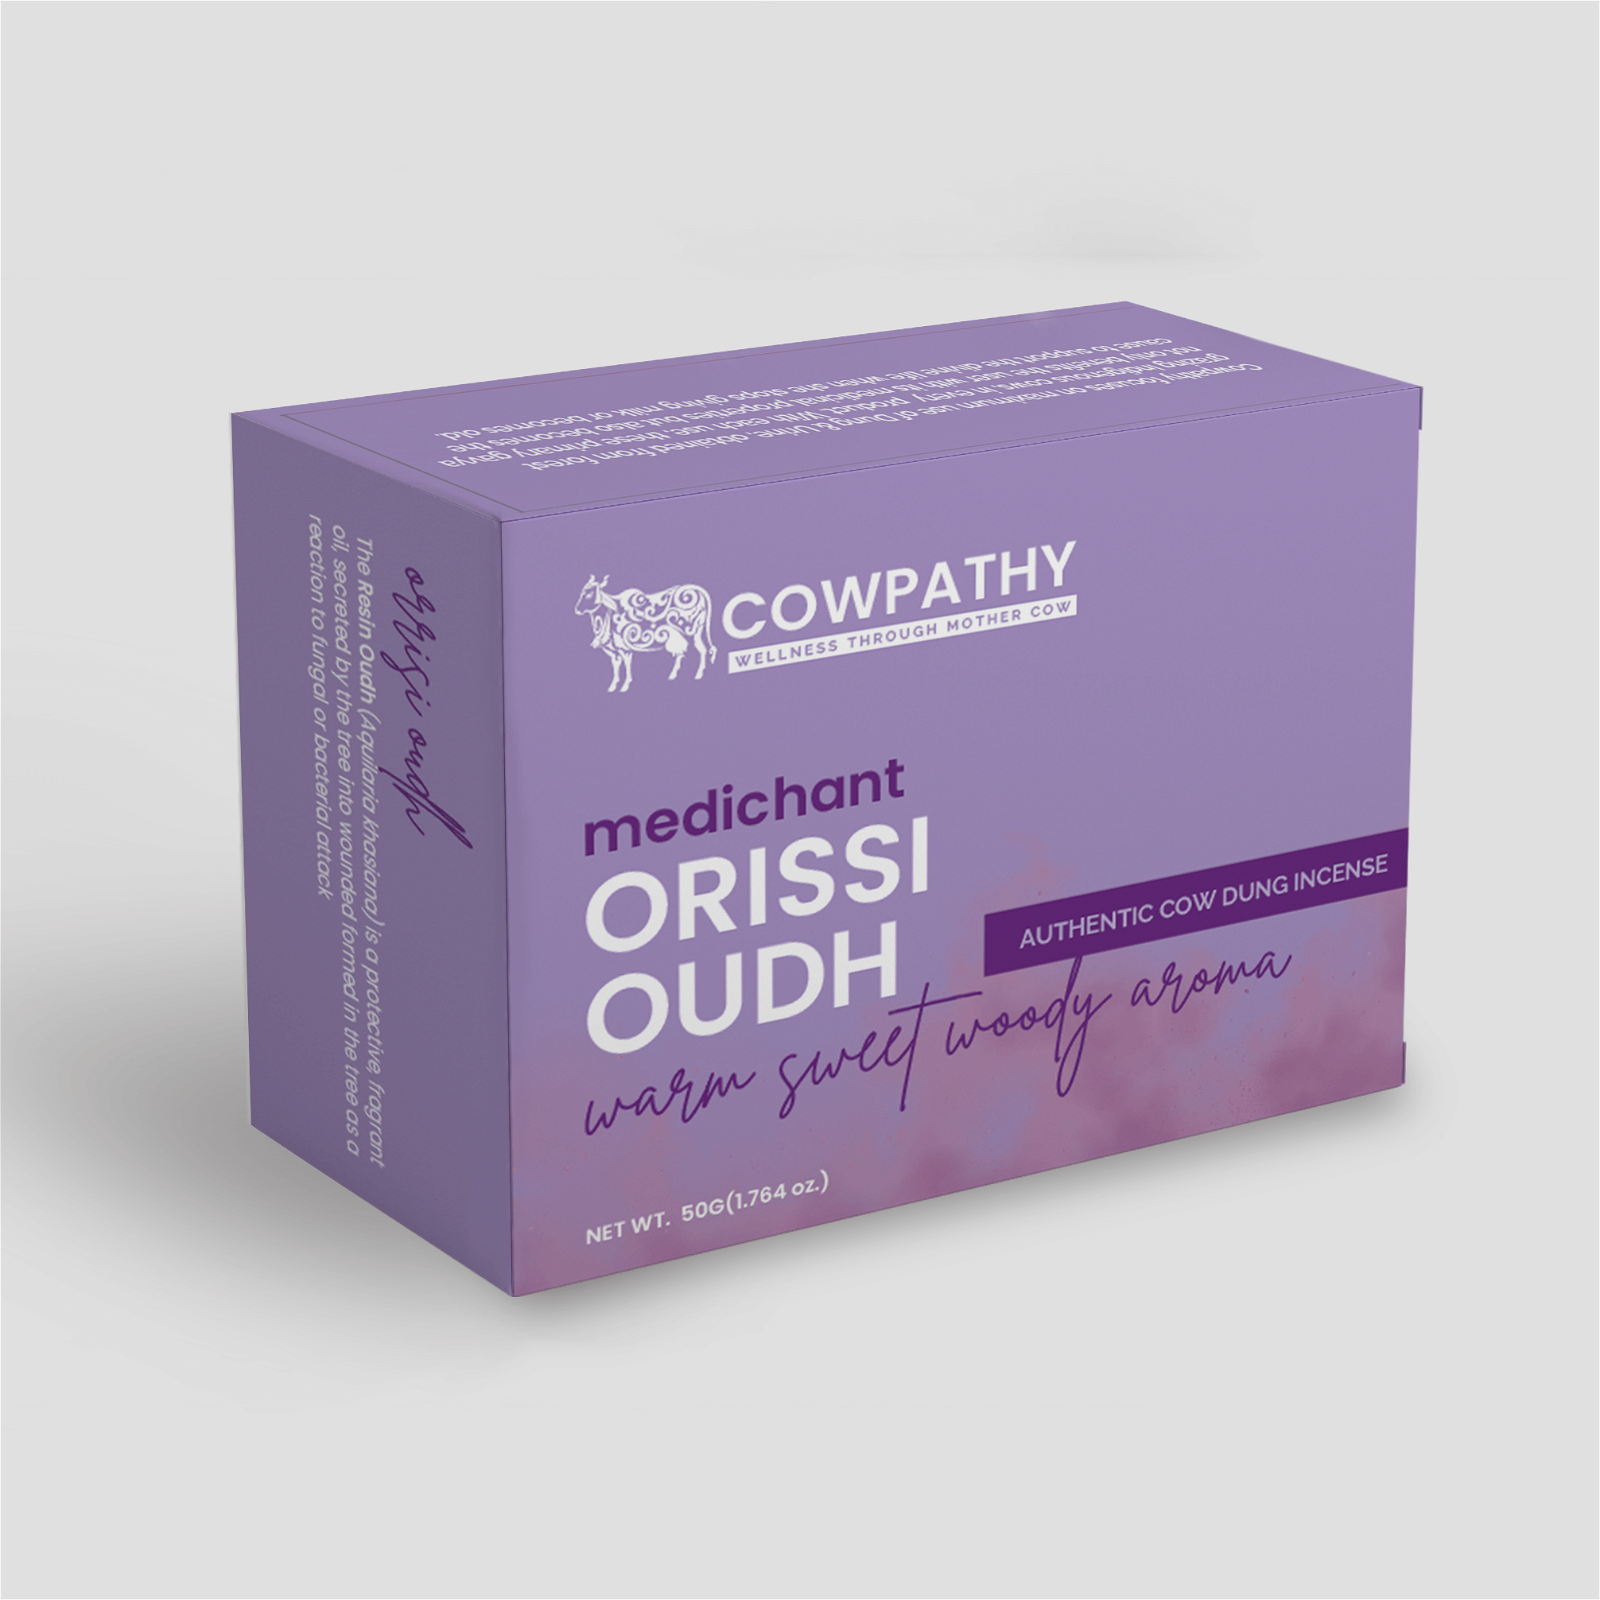 Cow Dung Incense Dhoop Stick Orissi Oudh